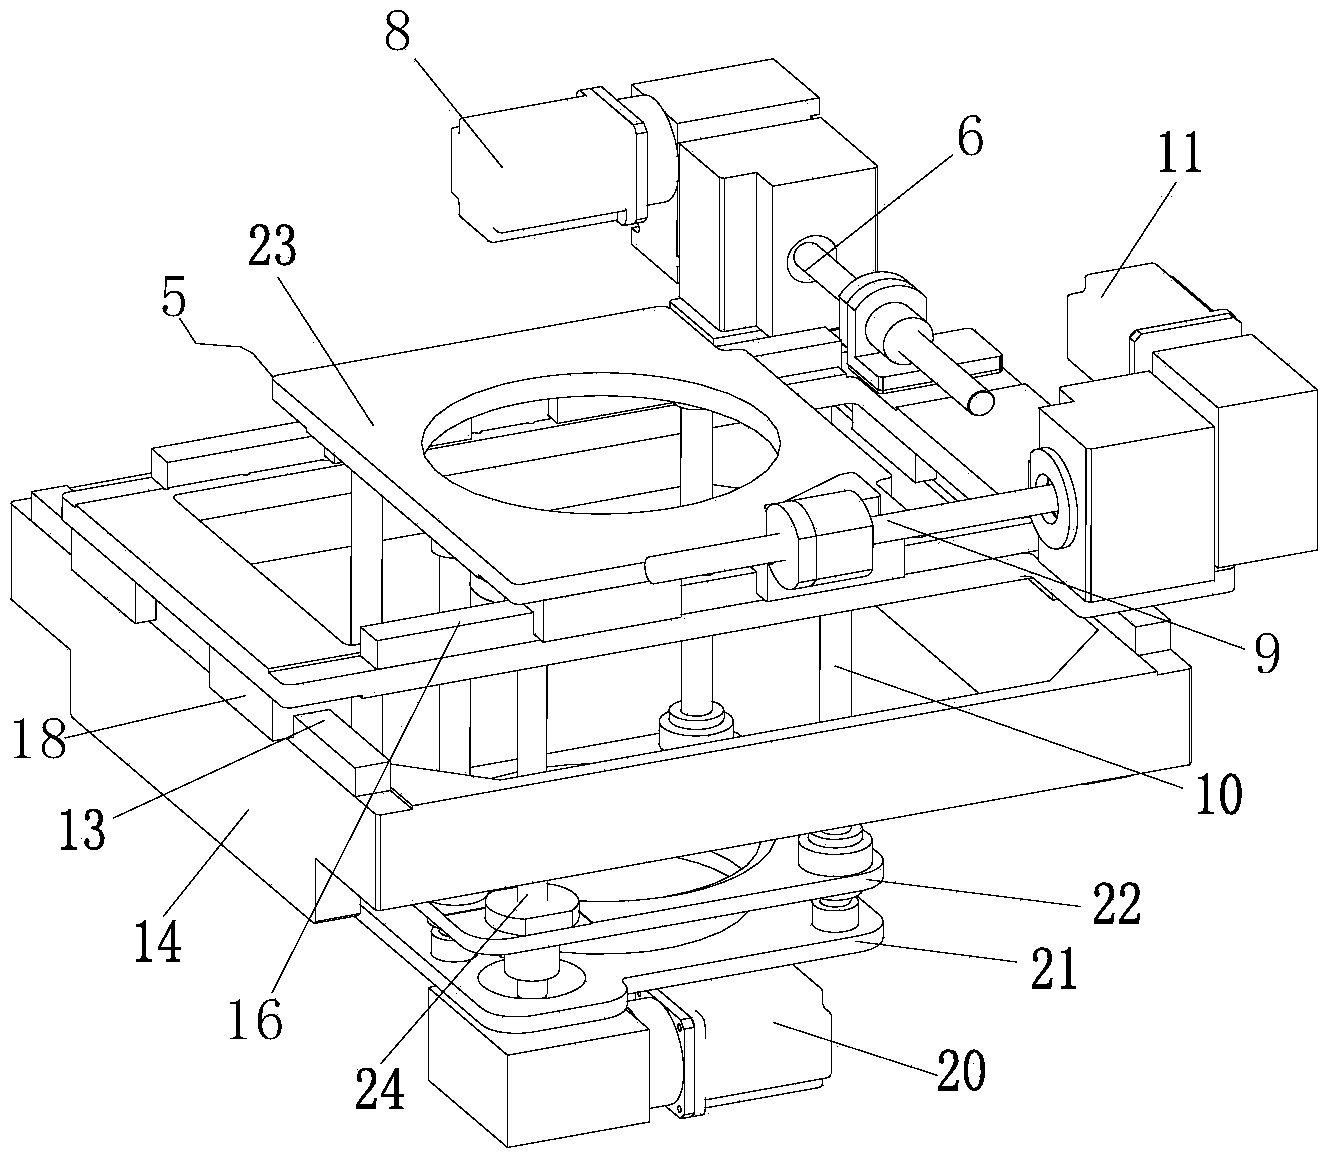 Movement scanning device of high-intensity focused ultrasonic treatment system